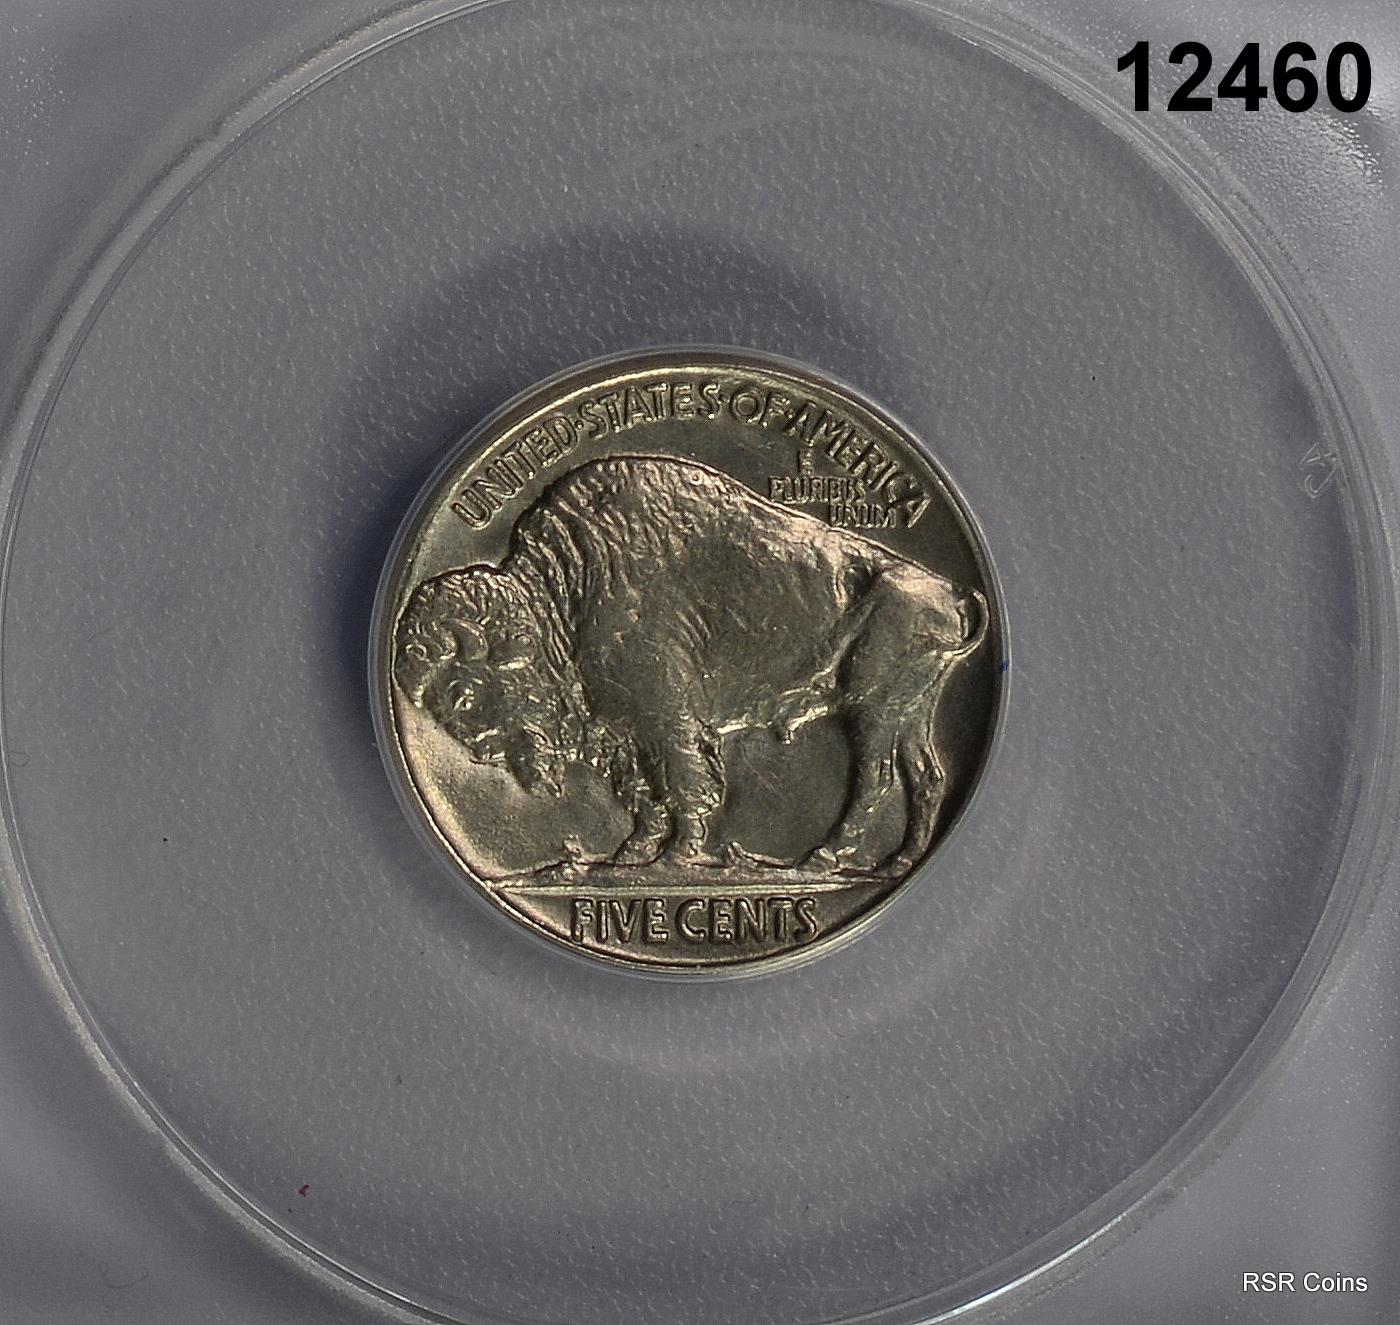 1937 BUFFALO NICKEL ANACS CERTIFIED AU58 SCRATCHED SMALL REVERSE SCRATCHES#12460